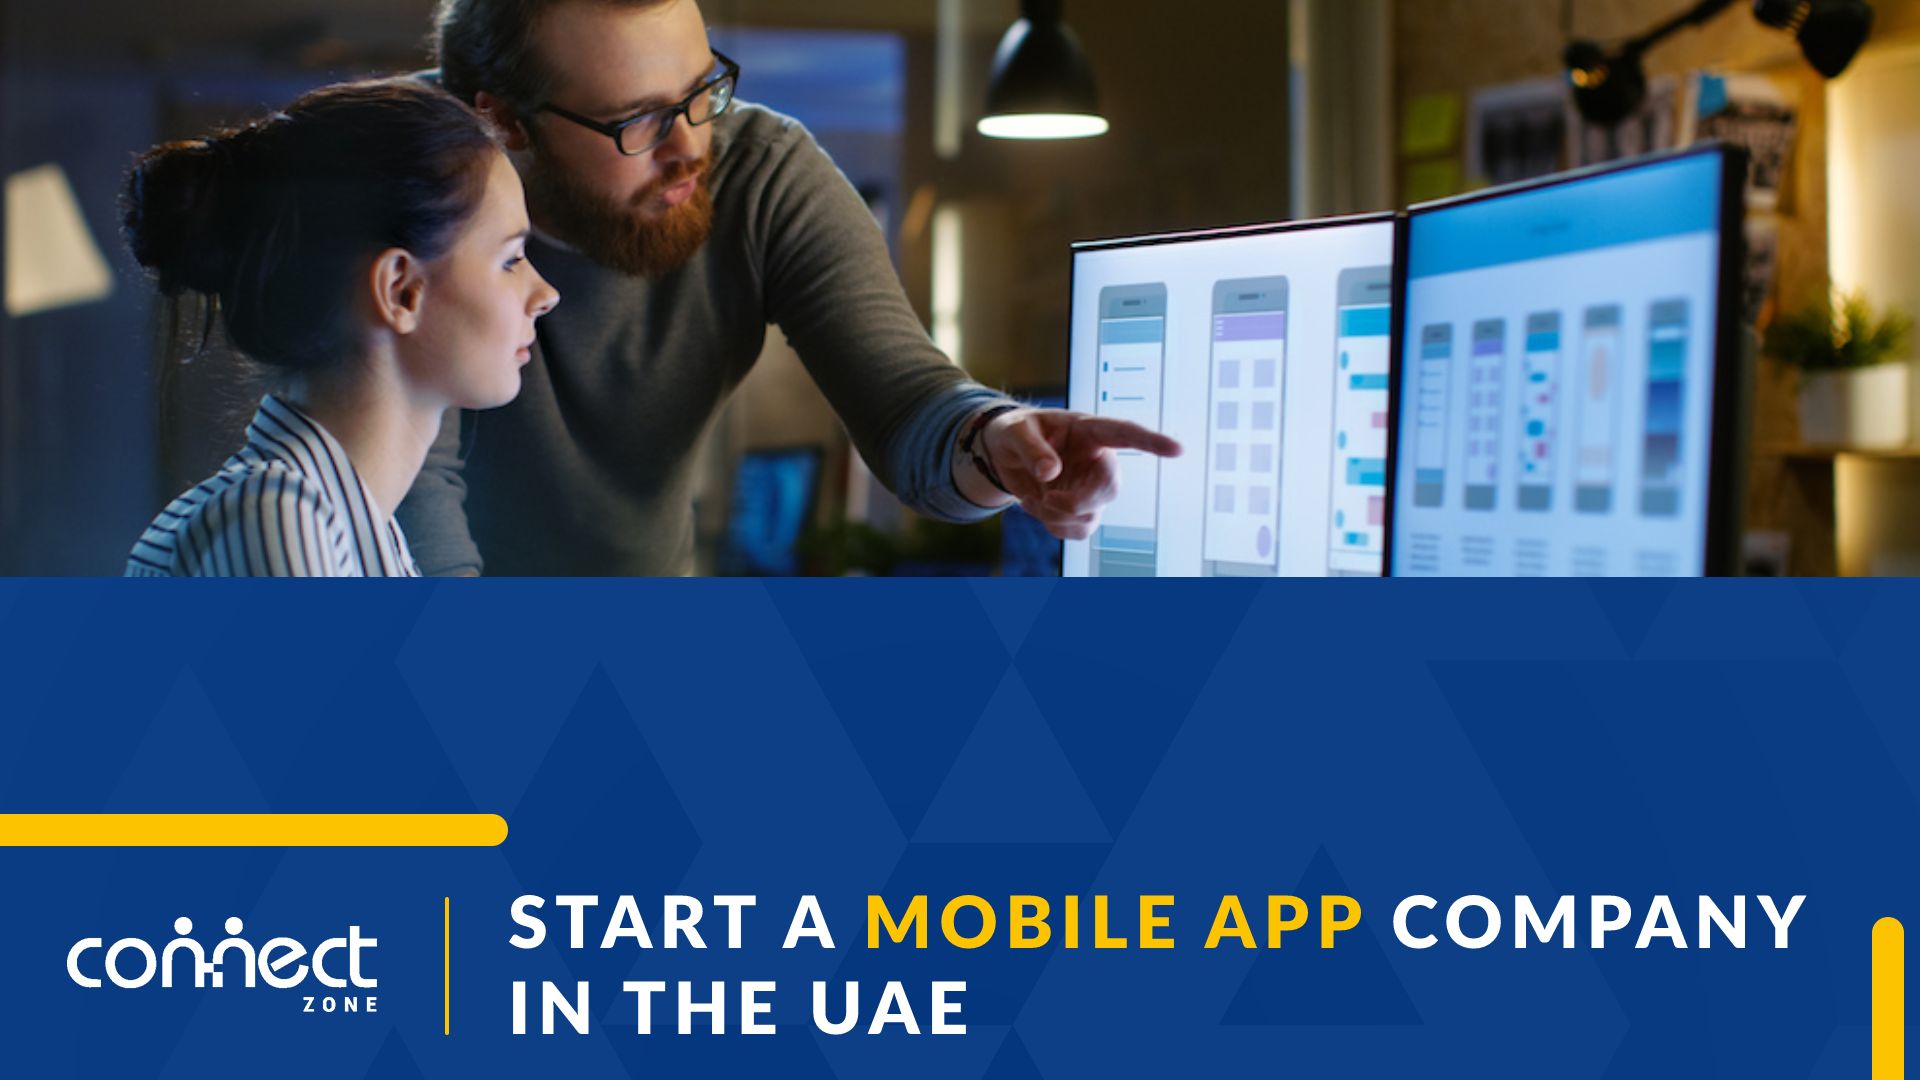 setup of a mobile app company in the UAE.